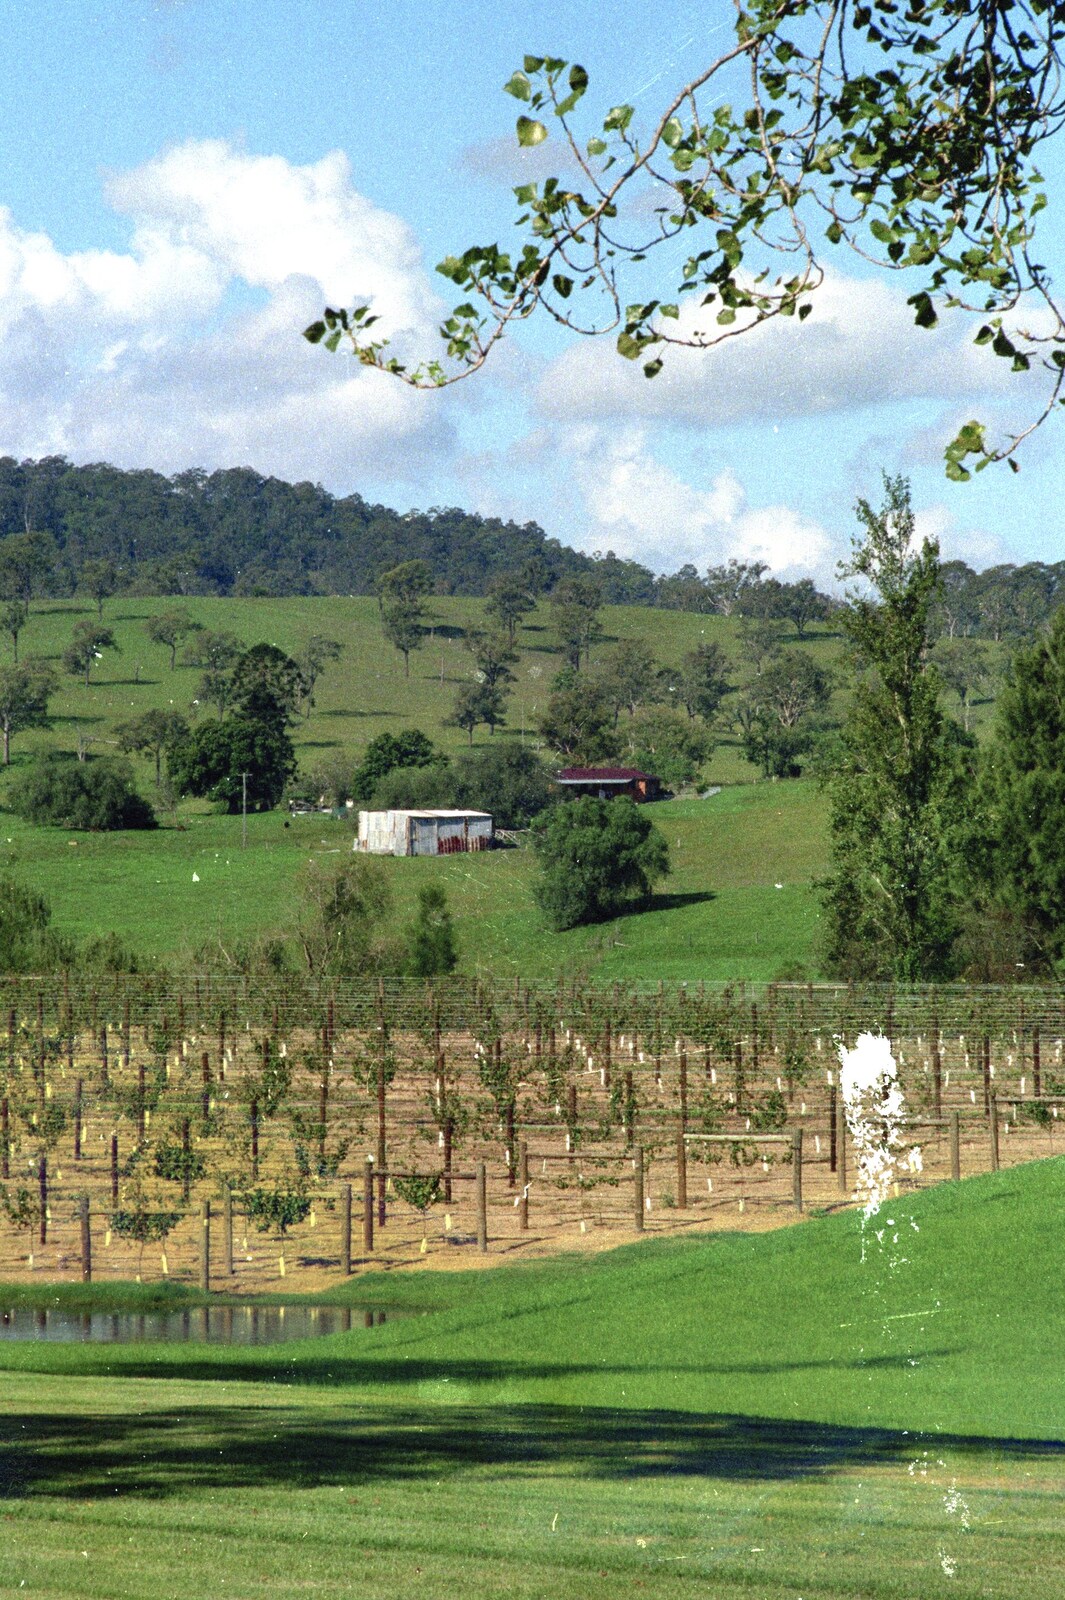 The vines of Wyndham Estate from A Trip to the Zoo, Sydney, Australia - 7th April 2000